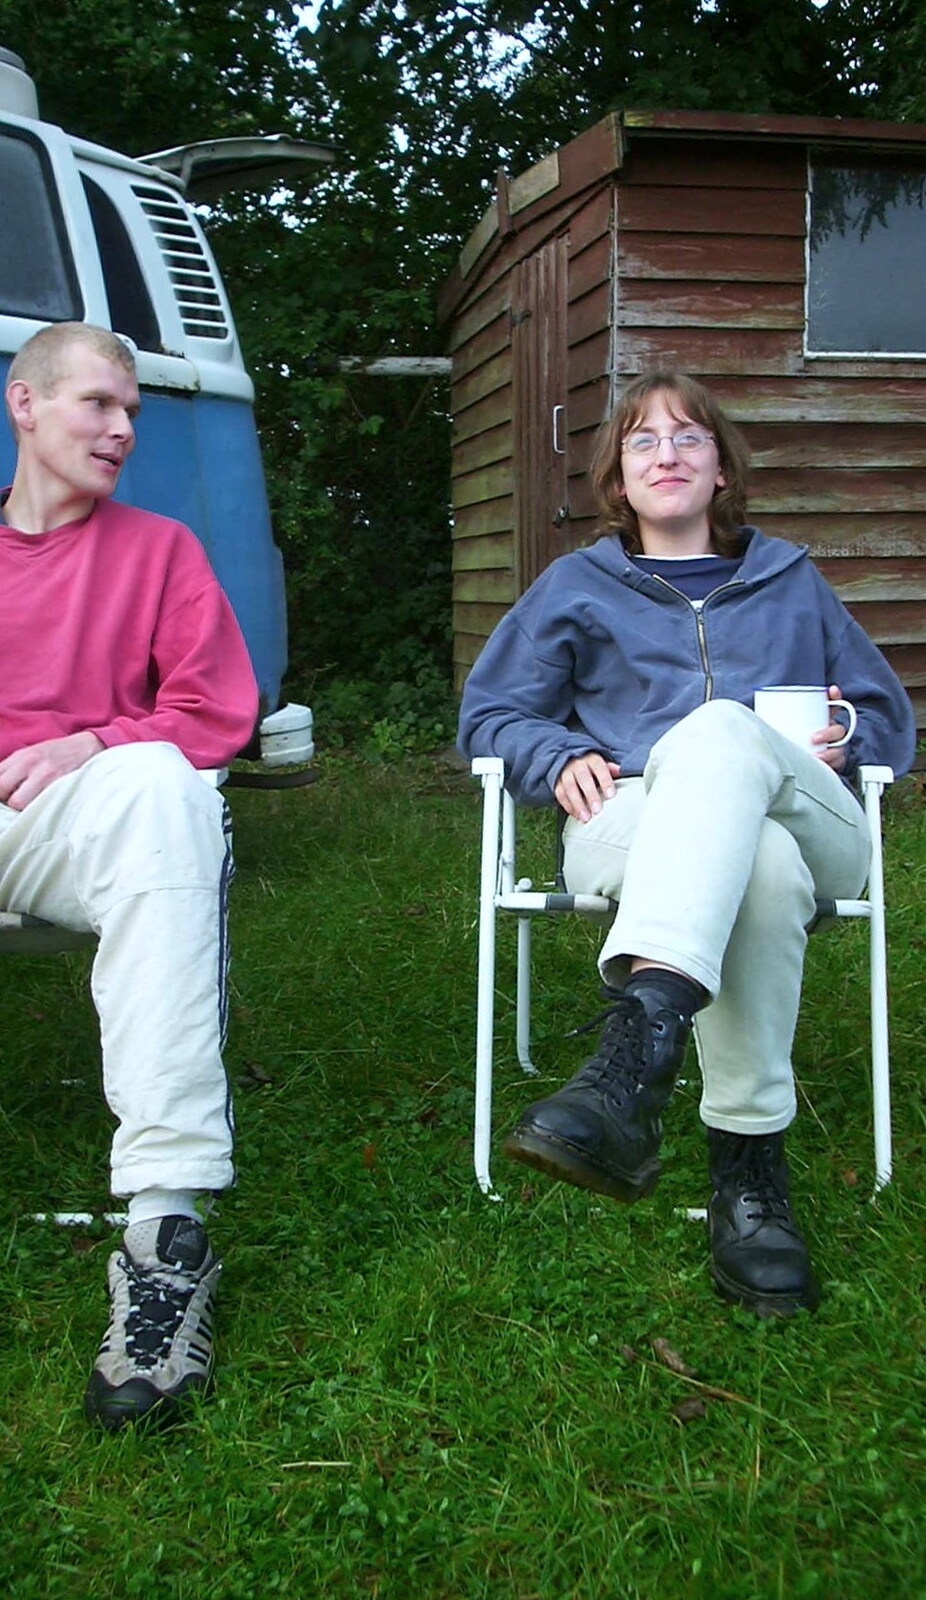 A BSCC Splinter Group Camping Weekend, Theberton, Suffolk - 11th August 2002: Bill and Suey have a mug of tea